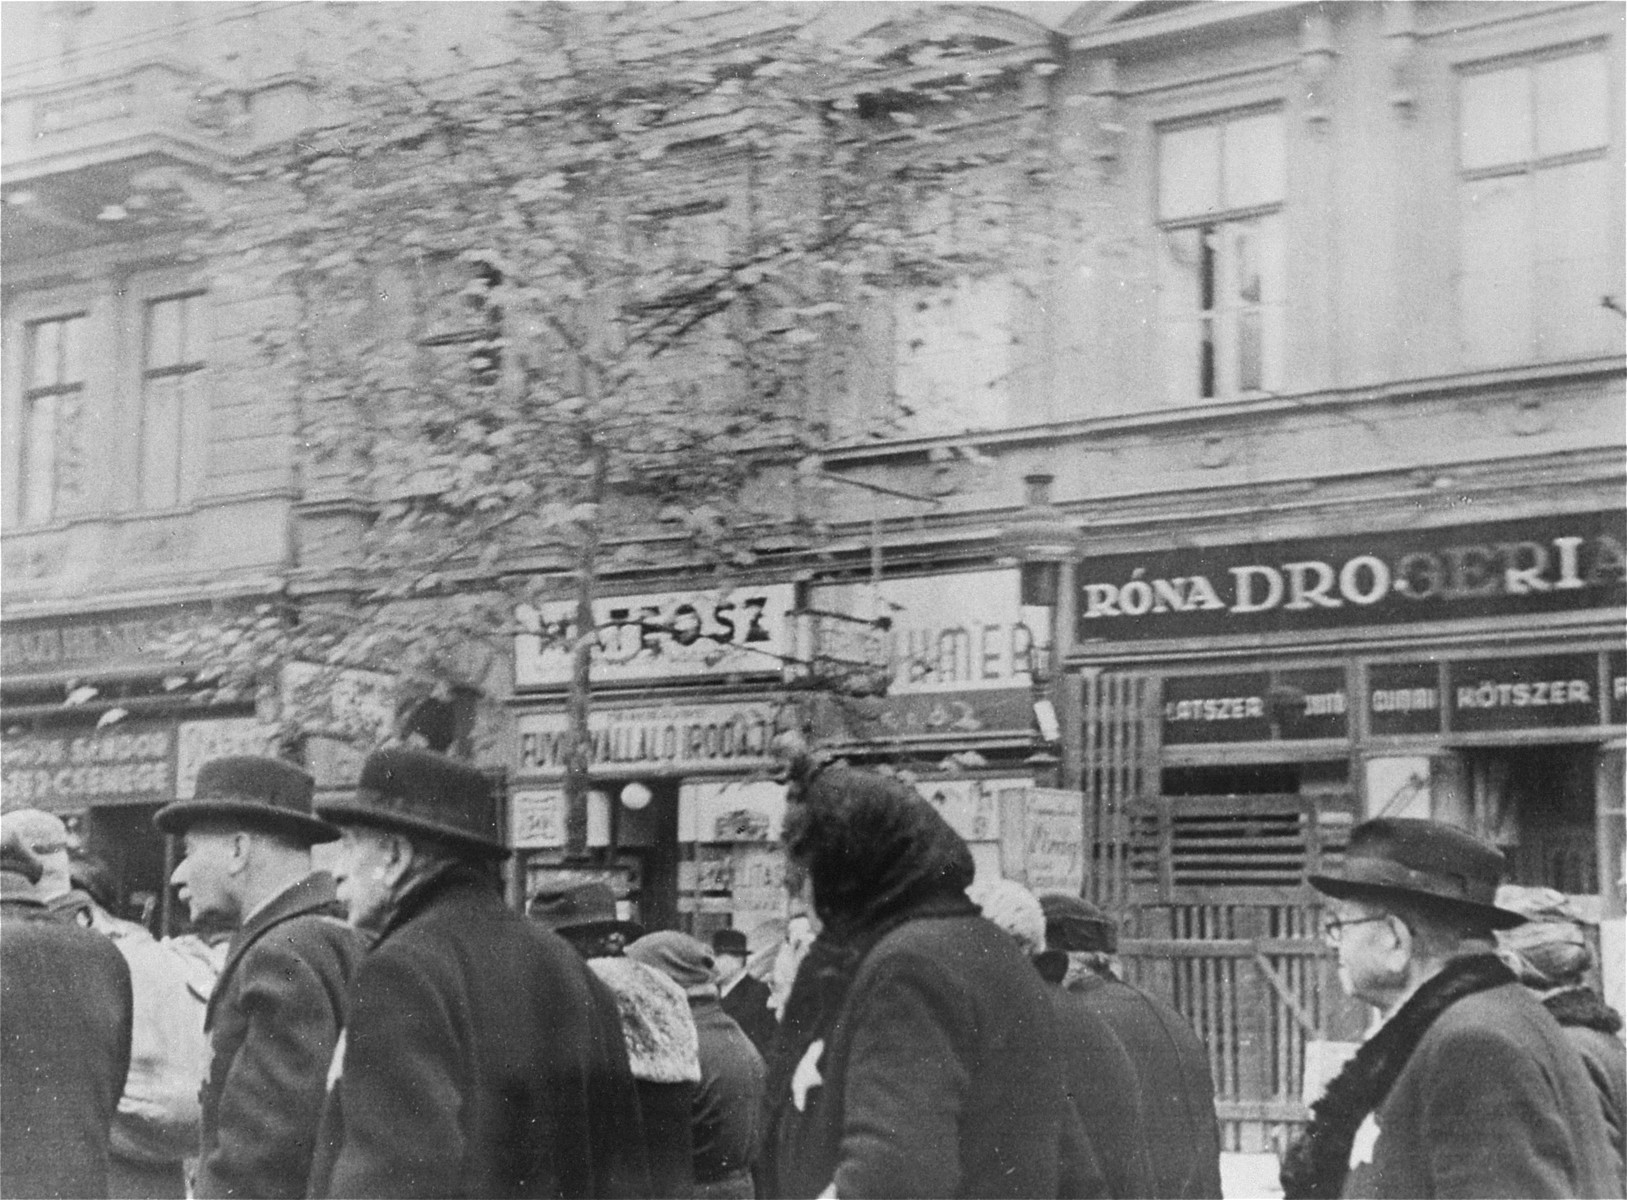 [Probably, elderly Jews being transferred to the newly formed central ghetto in Budapest.]

On November 13, 1944 the Arrow Cross ordered the establishment of a ghetto, and by December 2 most of Budapest's unprotected Jewish population had been moved within its borders.